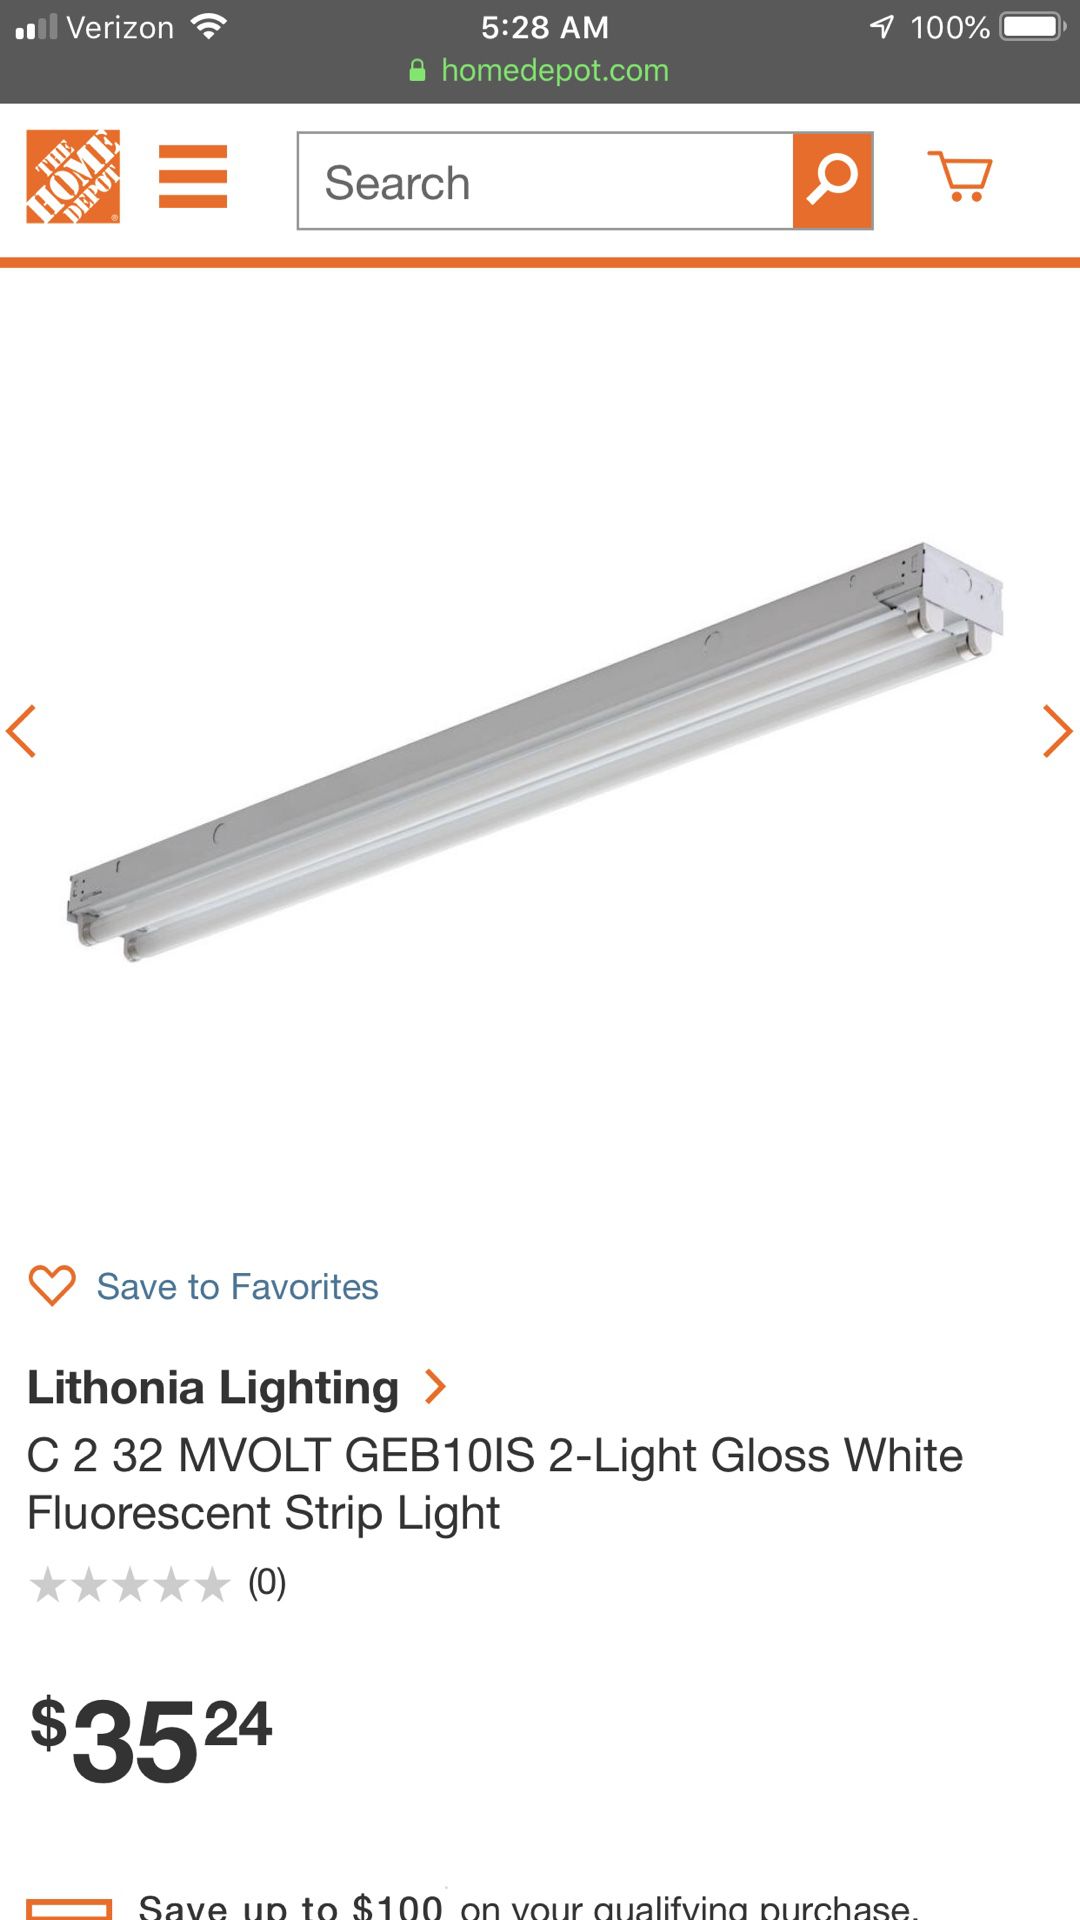 Brand new 4’ 2 Lamp Lithonia Fluorescent Light Fixture and Bulbs for Sale  in Miami, FL - OfferUp